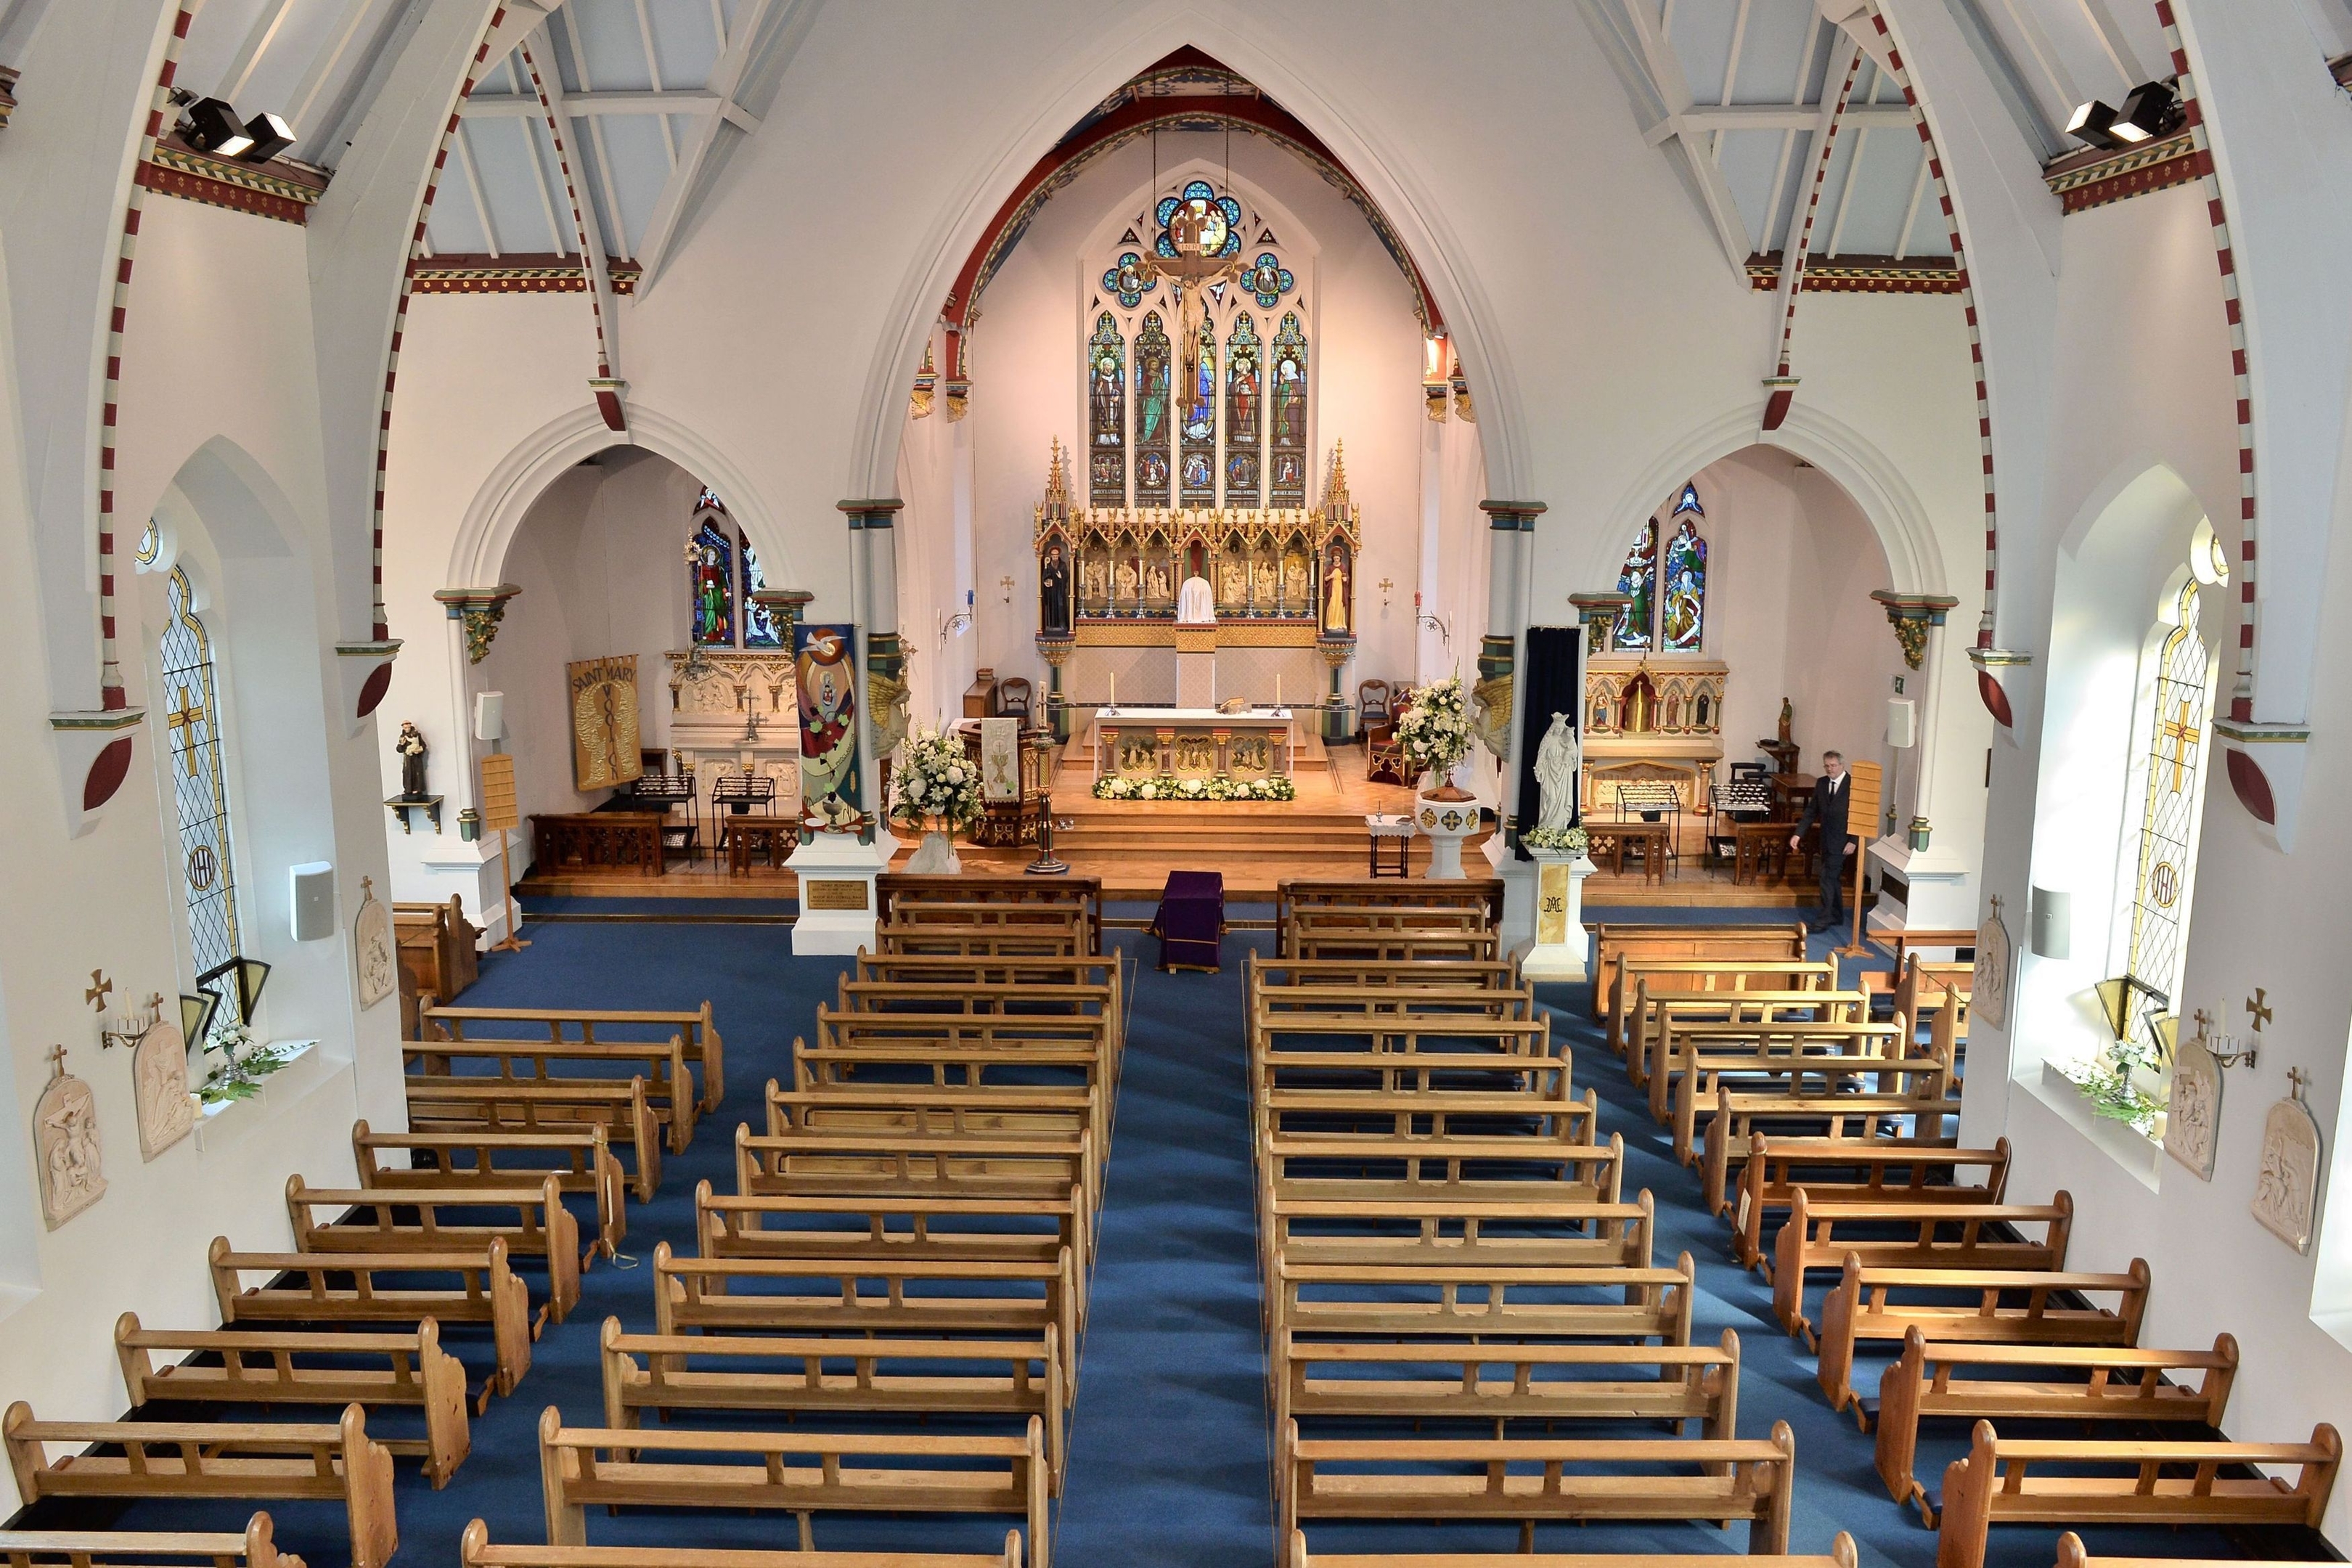 FREE EDITORIAL USE ONLY UNTIL AUGUST 27, 2015. AFTER THIS TIME A FEE IS PAYABLE A general view of inside St Mary's Church in Woolton, Liverpool, ahead of the funeral of Cilla Black. PRESS ASSOCIATION Photo. Picture date: Thursday August 20, 2015. Black's career spanned six decades before her sudden death, aged 72, after a fall at her villa in Spain on August 1. See PA story FUNERAL Cilla. Photo credit should read: Ray Tang/REX Shutterstock/PA Wire